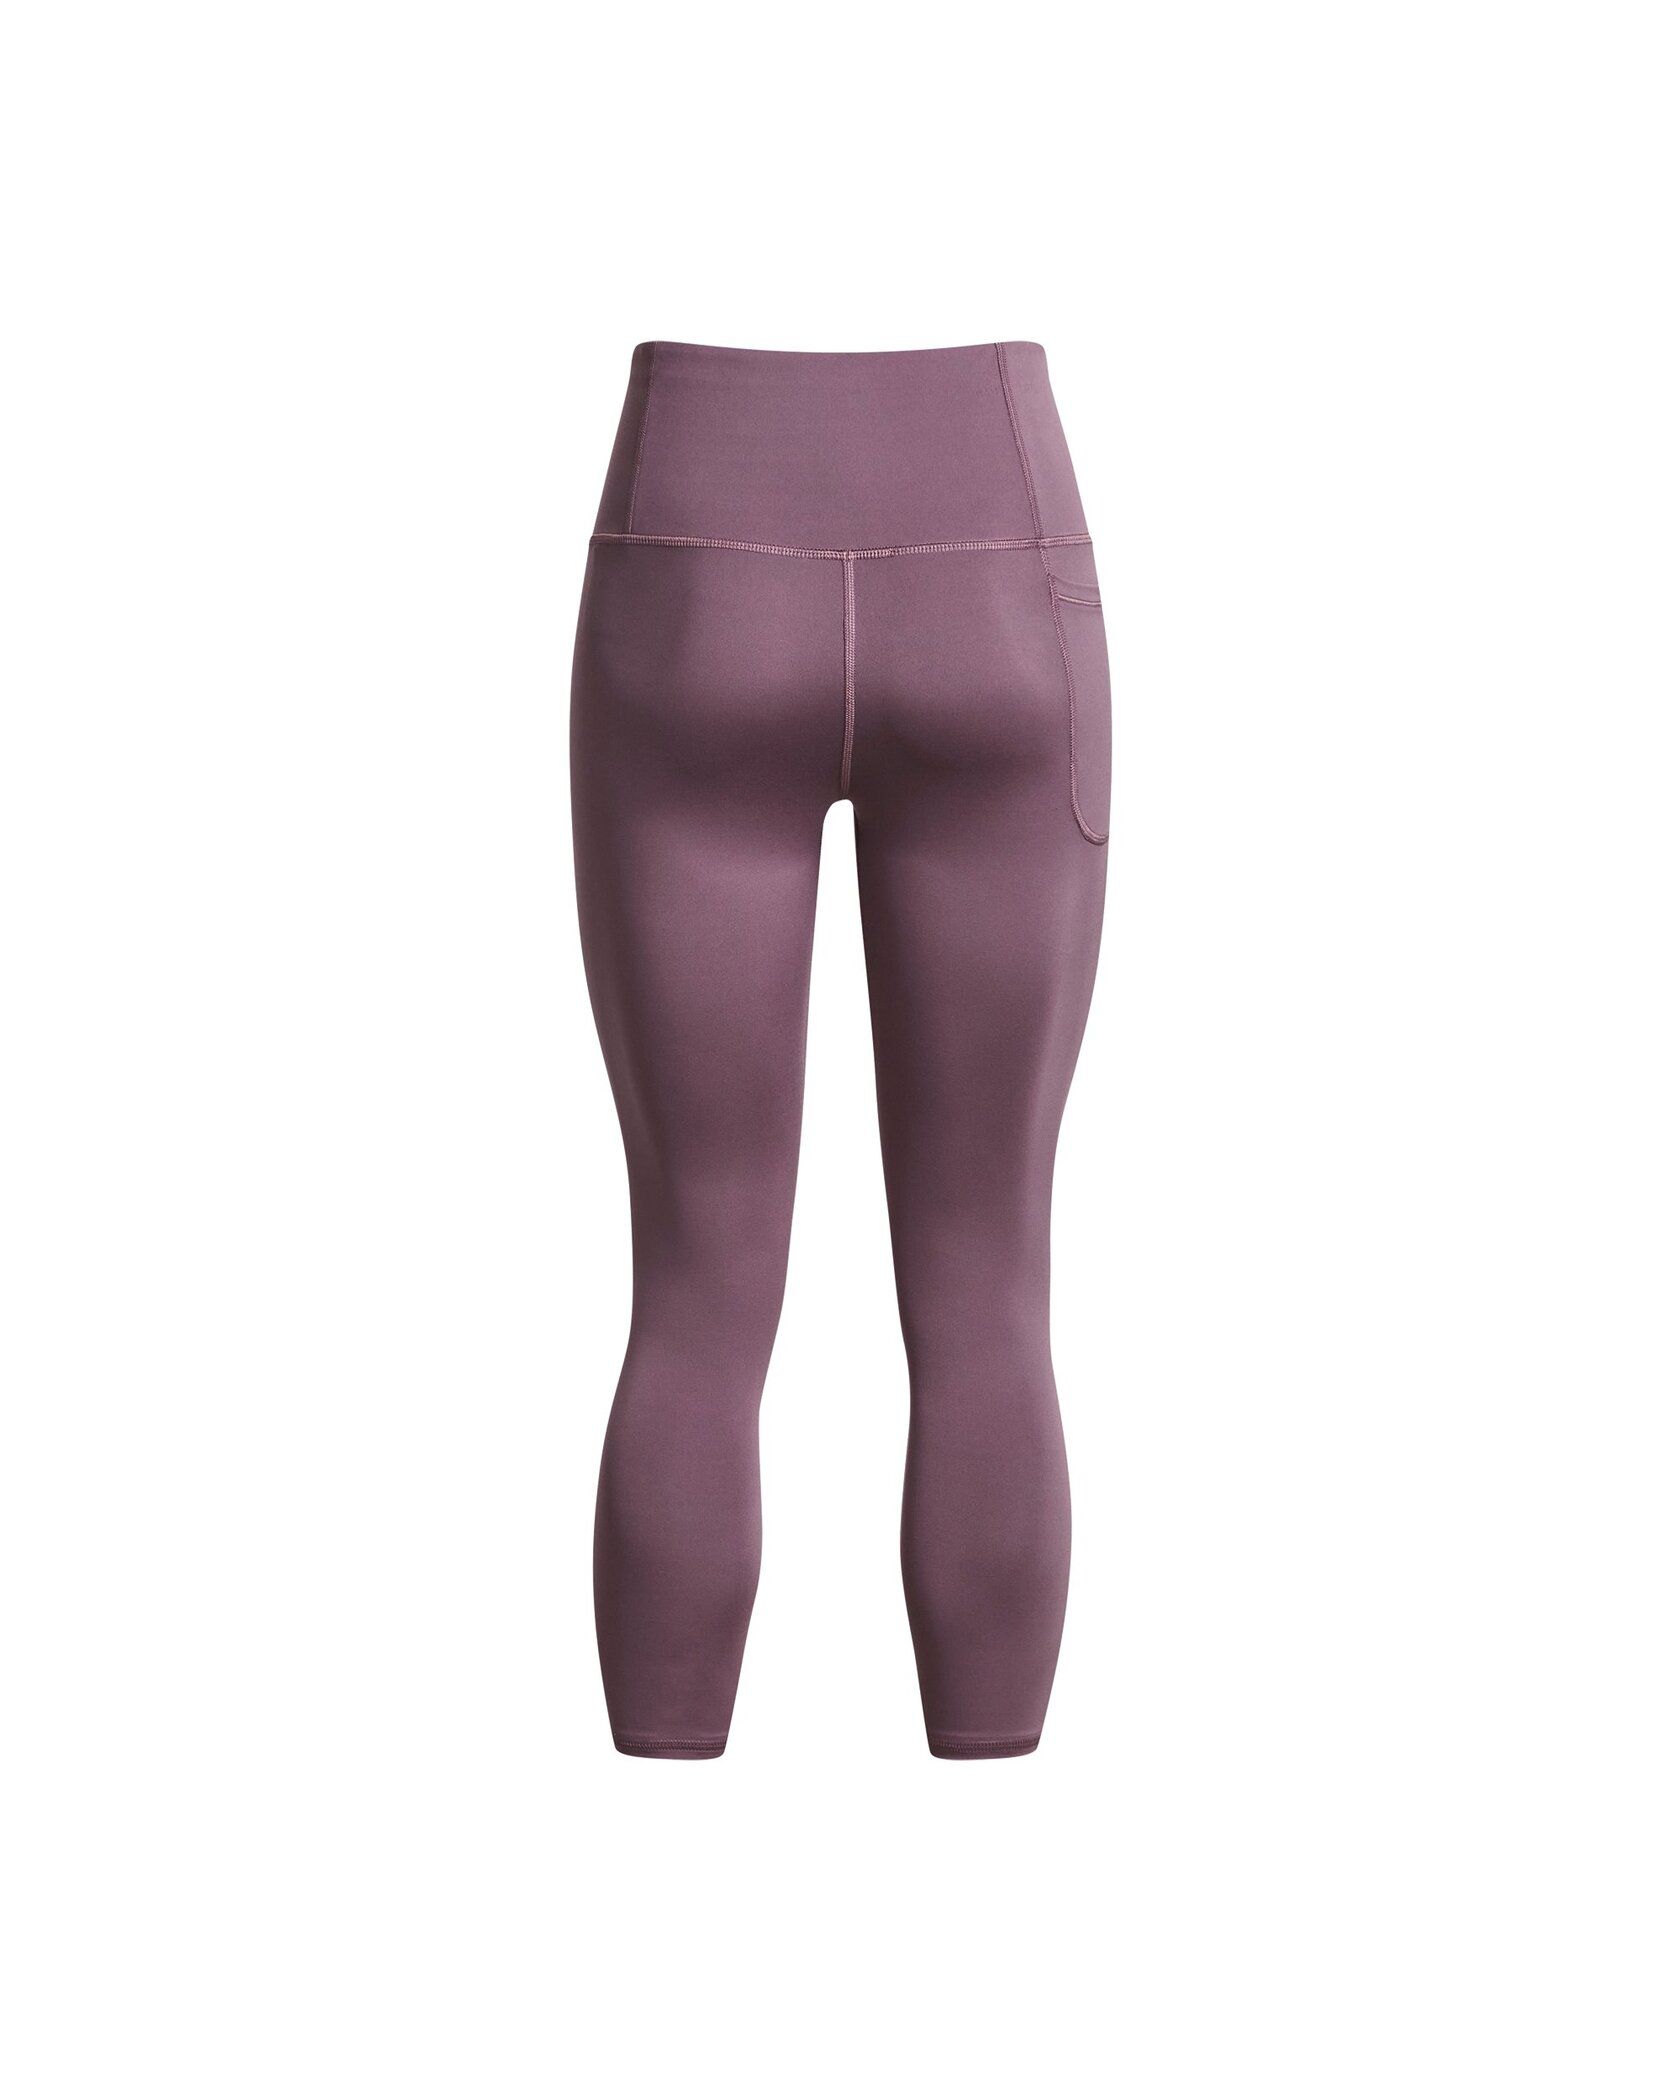 W inmotion High Rise Legging - Northland - Mountain Boutique Shop